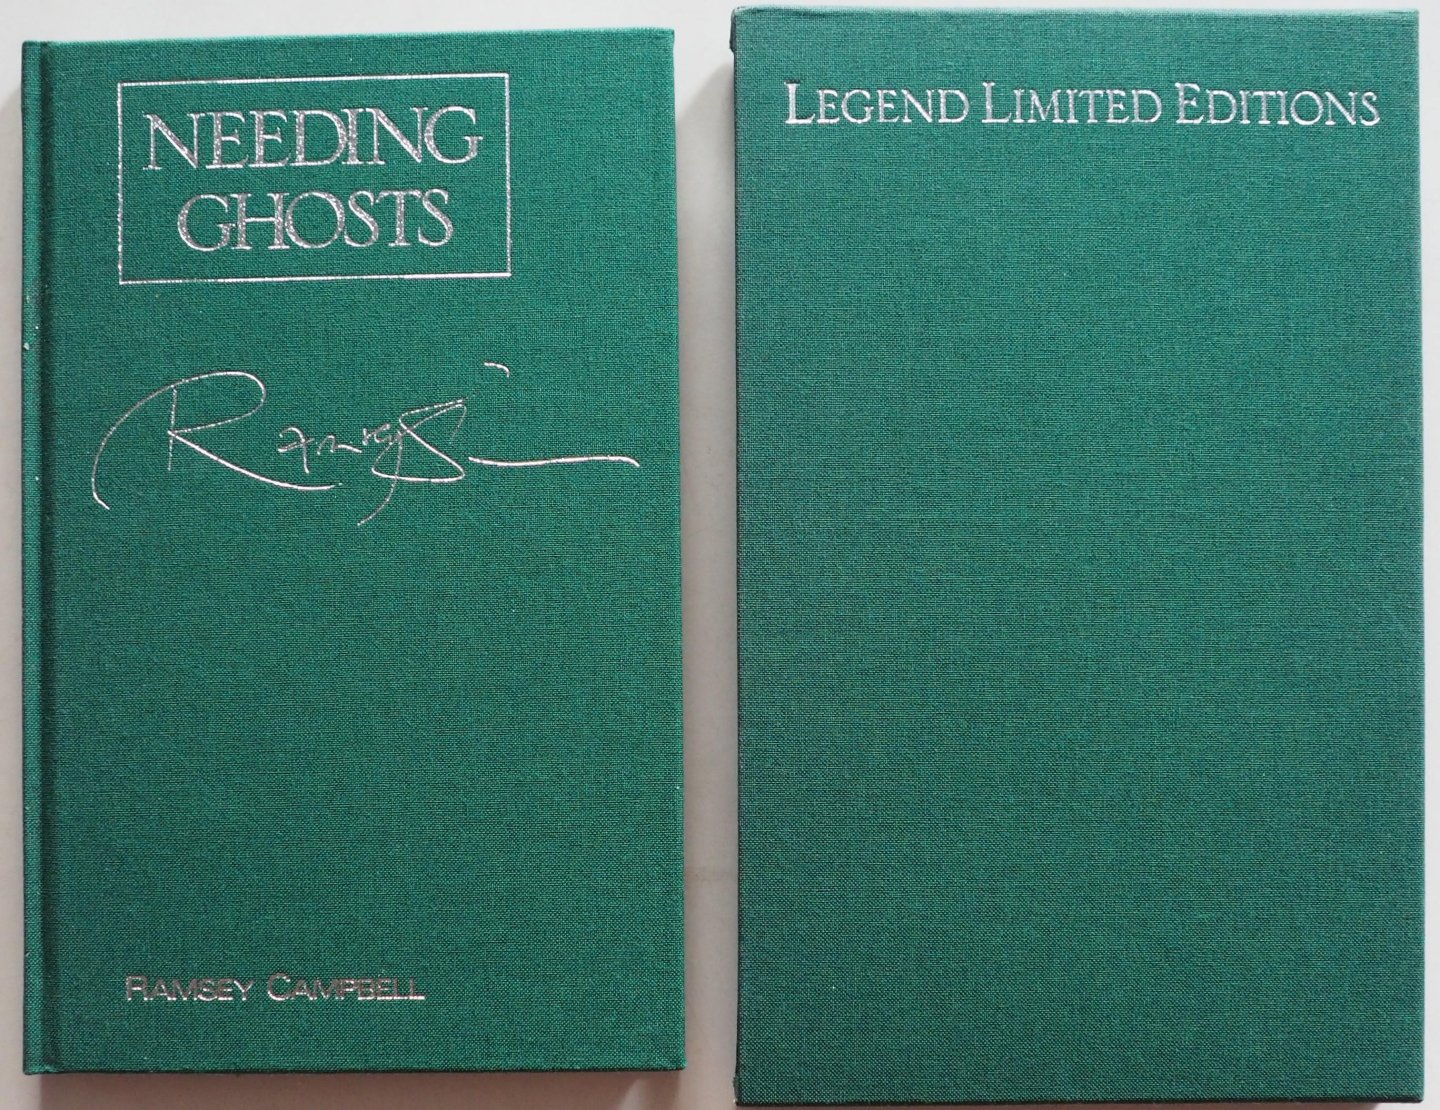 Campell Ramsey, ill. Akib Jamel - Needing Ghosts The special limited edition of three hunderd copies 205/300